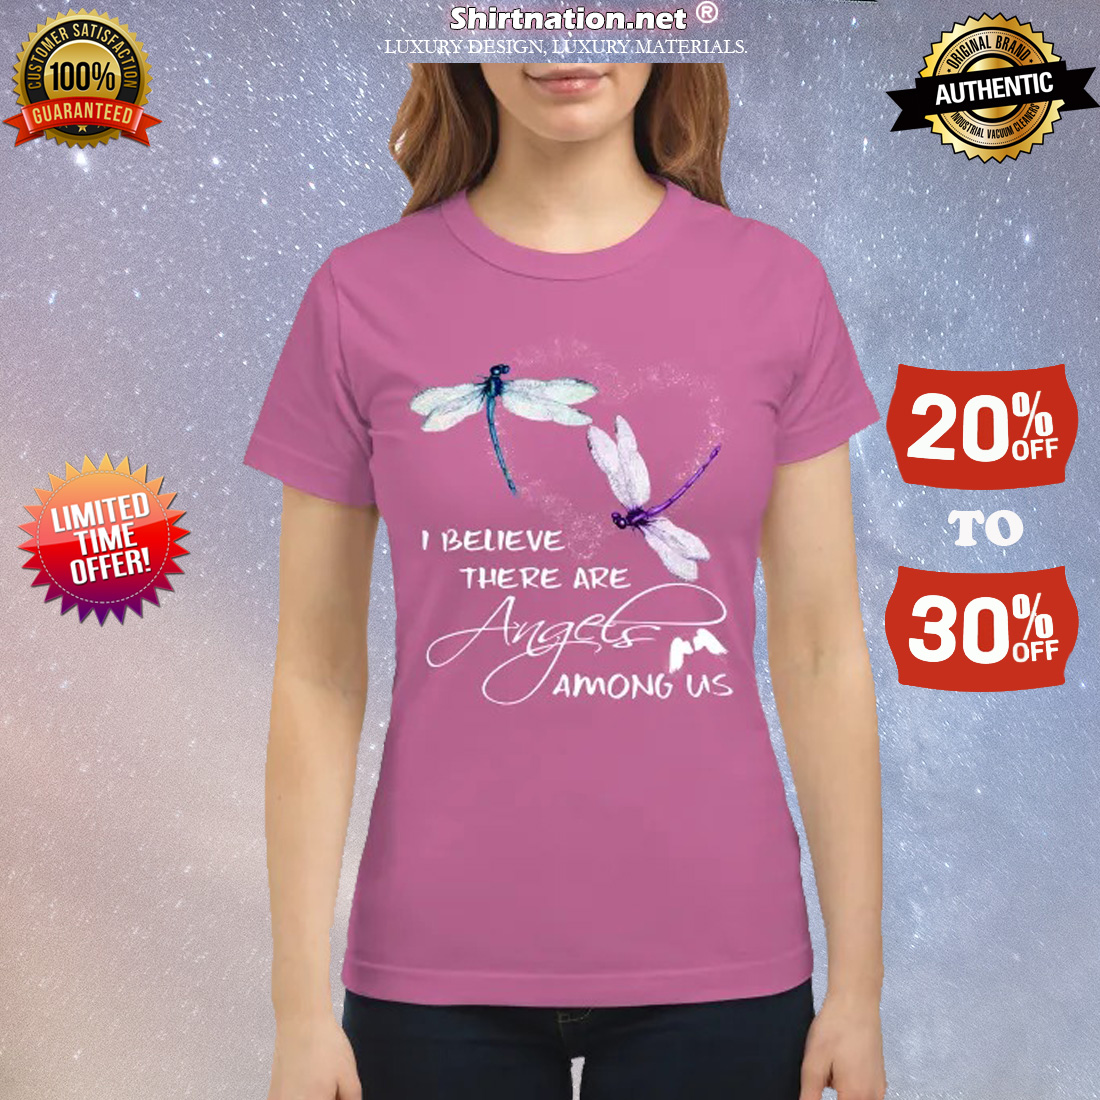 Dragonfly I believe there are angels among us classic shirt